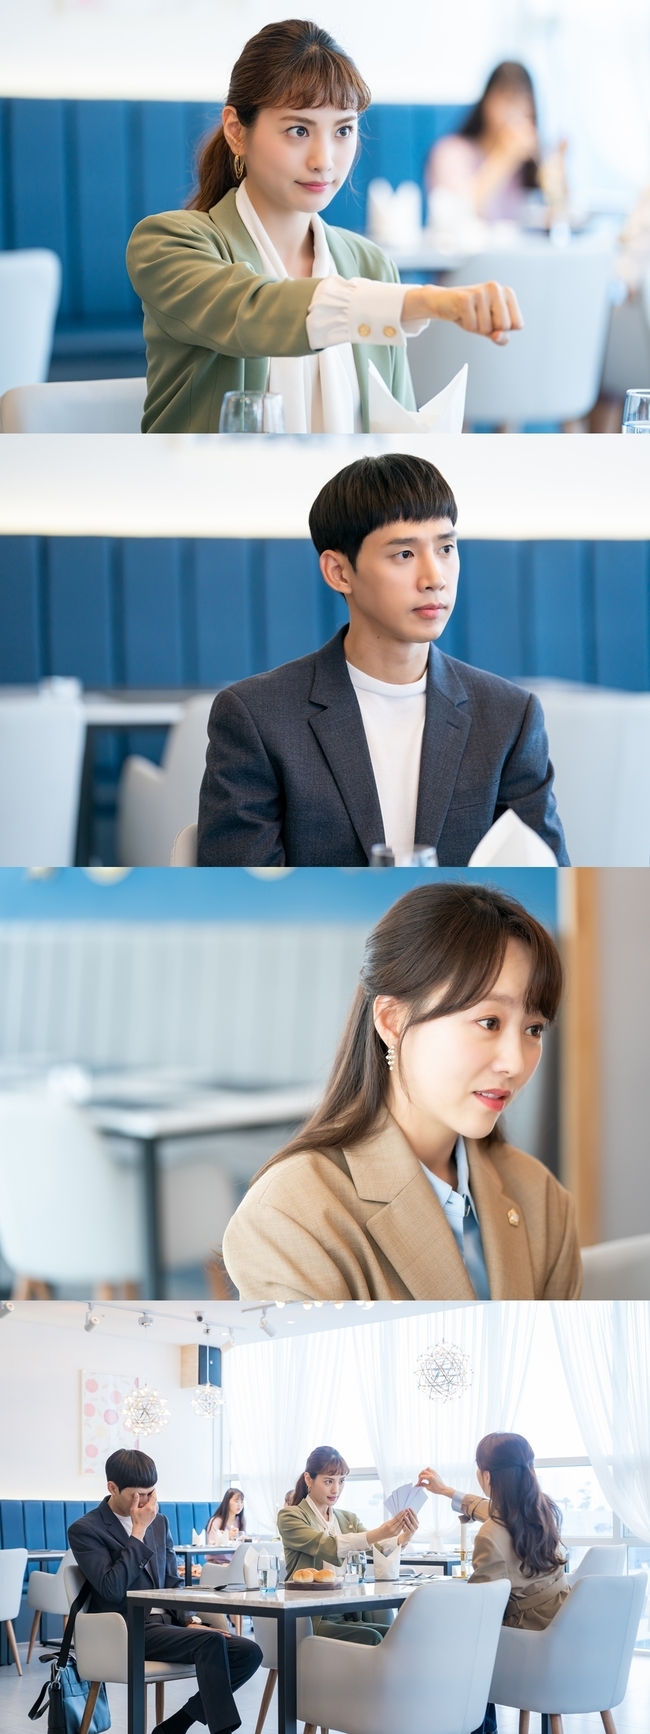 Love Triangle (DJ Ivy mix) of Chu Shi Biao Nana Park Sung-hoon Yoo Da-In was captured.KBS 2TV Tree Drama There are two attractive women who look like Chu Shi Biao (playplayed by Moon Hyun-kyung/director Hwang Seung-ki, Choi Yeon-soo/production Celltrion Entertainment, and Frame Media/hereinafter, Chu Shi Biao) without getting a job.He is a former lawyer and former civil servant of the fire moth, Sarah (Nana) and Yoon Hee-soo (Yoo Da-In).And the man loved by these two women is the principled Grade 5 clerk, Seo Gong-myeong (Park Sung-hoon).The relationship between the three is bringing a different kind of fun to the Chu Shi Biao. The former and Yoon Hee-soo are subtly at odds, both in work and in love.Of course, Sarah and Seogong have recently confirmed each others hearts and started a full-fledged love affair.With the chairmanship also passed on to the former Sarah, we can guess how Yoon Hee-soo will react if we learn about the devotion of the former Sarah and Seo Gong-myeong.Meanwhile, on August 5, the production team of Chu Shi Biao unveiled the three people who were in a subtle triangle, Sarah, Seo Gong-myeong and Yoon Hee-soos Love Triangle (DJ Ivy Mix).I wonder why the three people met together, what kind of laughter this meeting will give, and how it will affect the development afterwards.In the photo, Sarah, Seo Gong-myeong, and Yoon Hee-soo sit opposite each other in what appears to be a restaurant, while Sarah and Seo Gong-myeong sit opposite each other.It is a very natural position as the former Sarah is the chairman of the council and the secretary of the former Sarah.However, Yoon Hee-soo, who is favorable to Seogong, is not likely to be very happy.At the same time, what attracts attention is the behavior of the old Sarah, who is pushing his fists at Yoon Hee-soo as if inducing fighting.He also had Yoon Hee-soo pick a piece with several sheets of paper open, and he had covered his eyes with his hands as if he could not see the sermon that he had watched at first.On the other hand, Yoon Hee-soo is making a unique cynical and absurd look.Why did the three of them meet? In the eleventh episode of Today (5th), Sarah asks Yoon Hee-soo for some kind of help.To this end, the former Sarah, Seo Gong-myeong, and Yoon Hee-soo meet in one place, and an unexpected proposal will appear in the process and give a smile. In addition, he added, I know the meaningful fact from the standpoint of Yoon Hee-soo, who is favorable to Seogong-myeong.kim myeong-mi